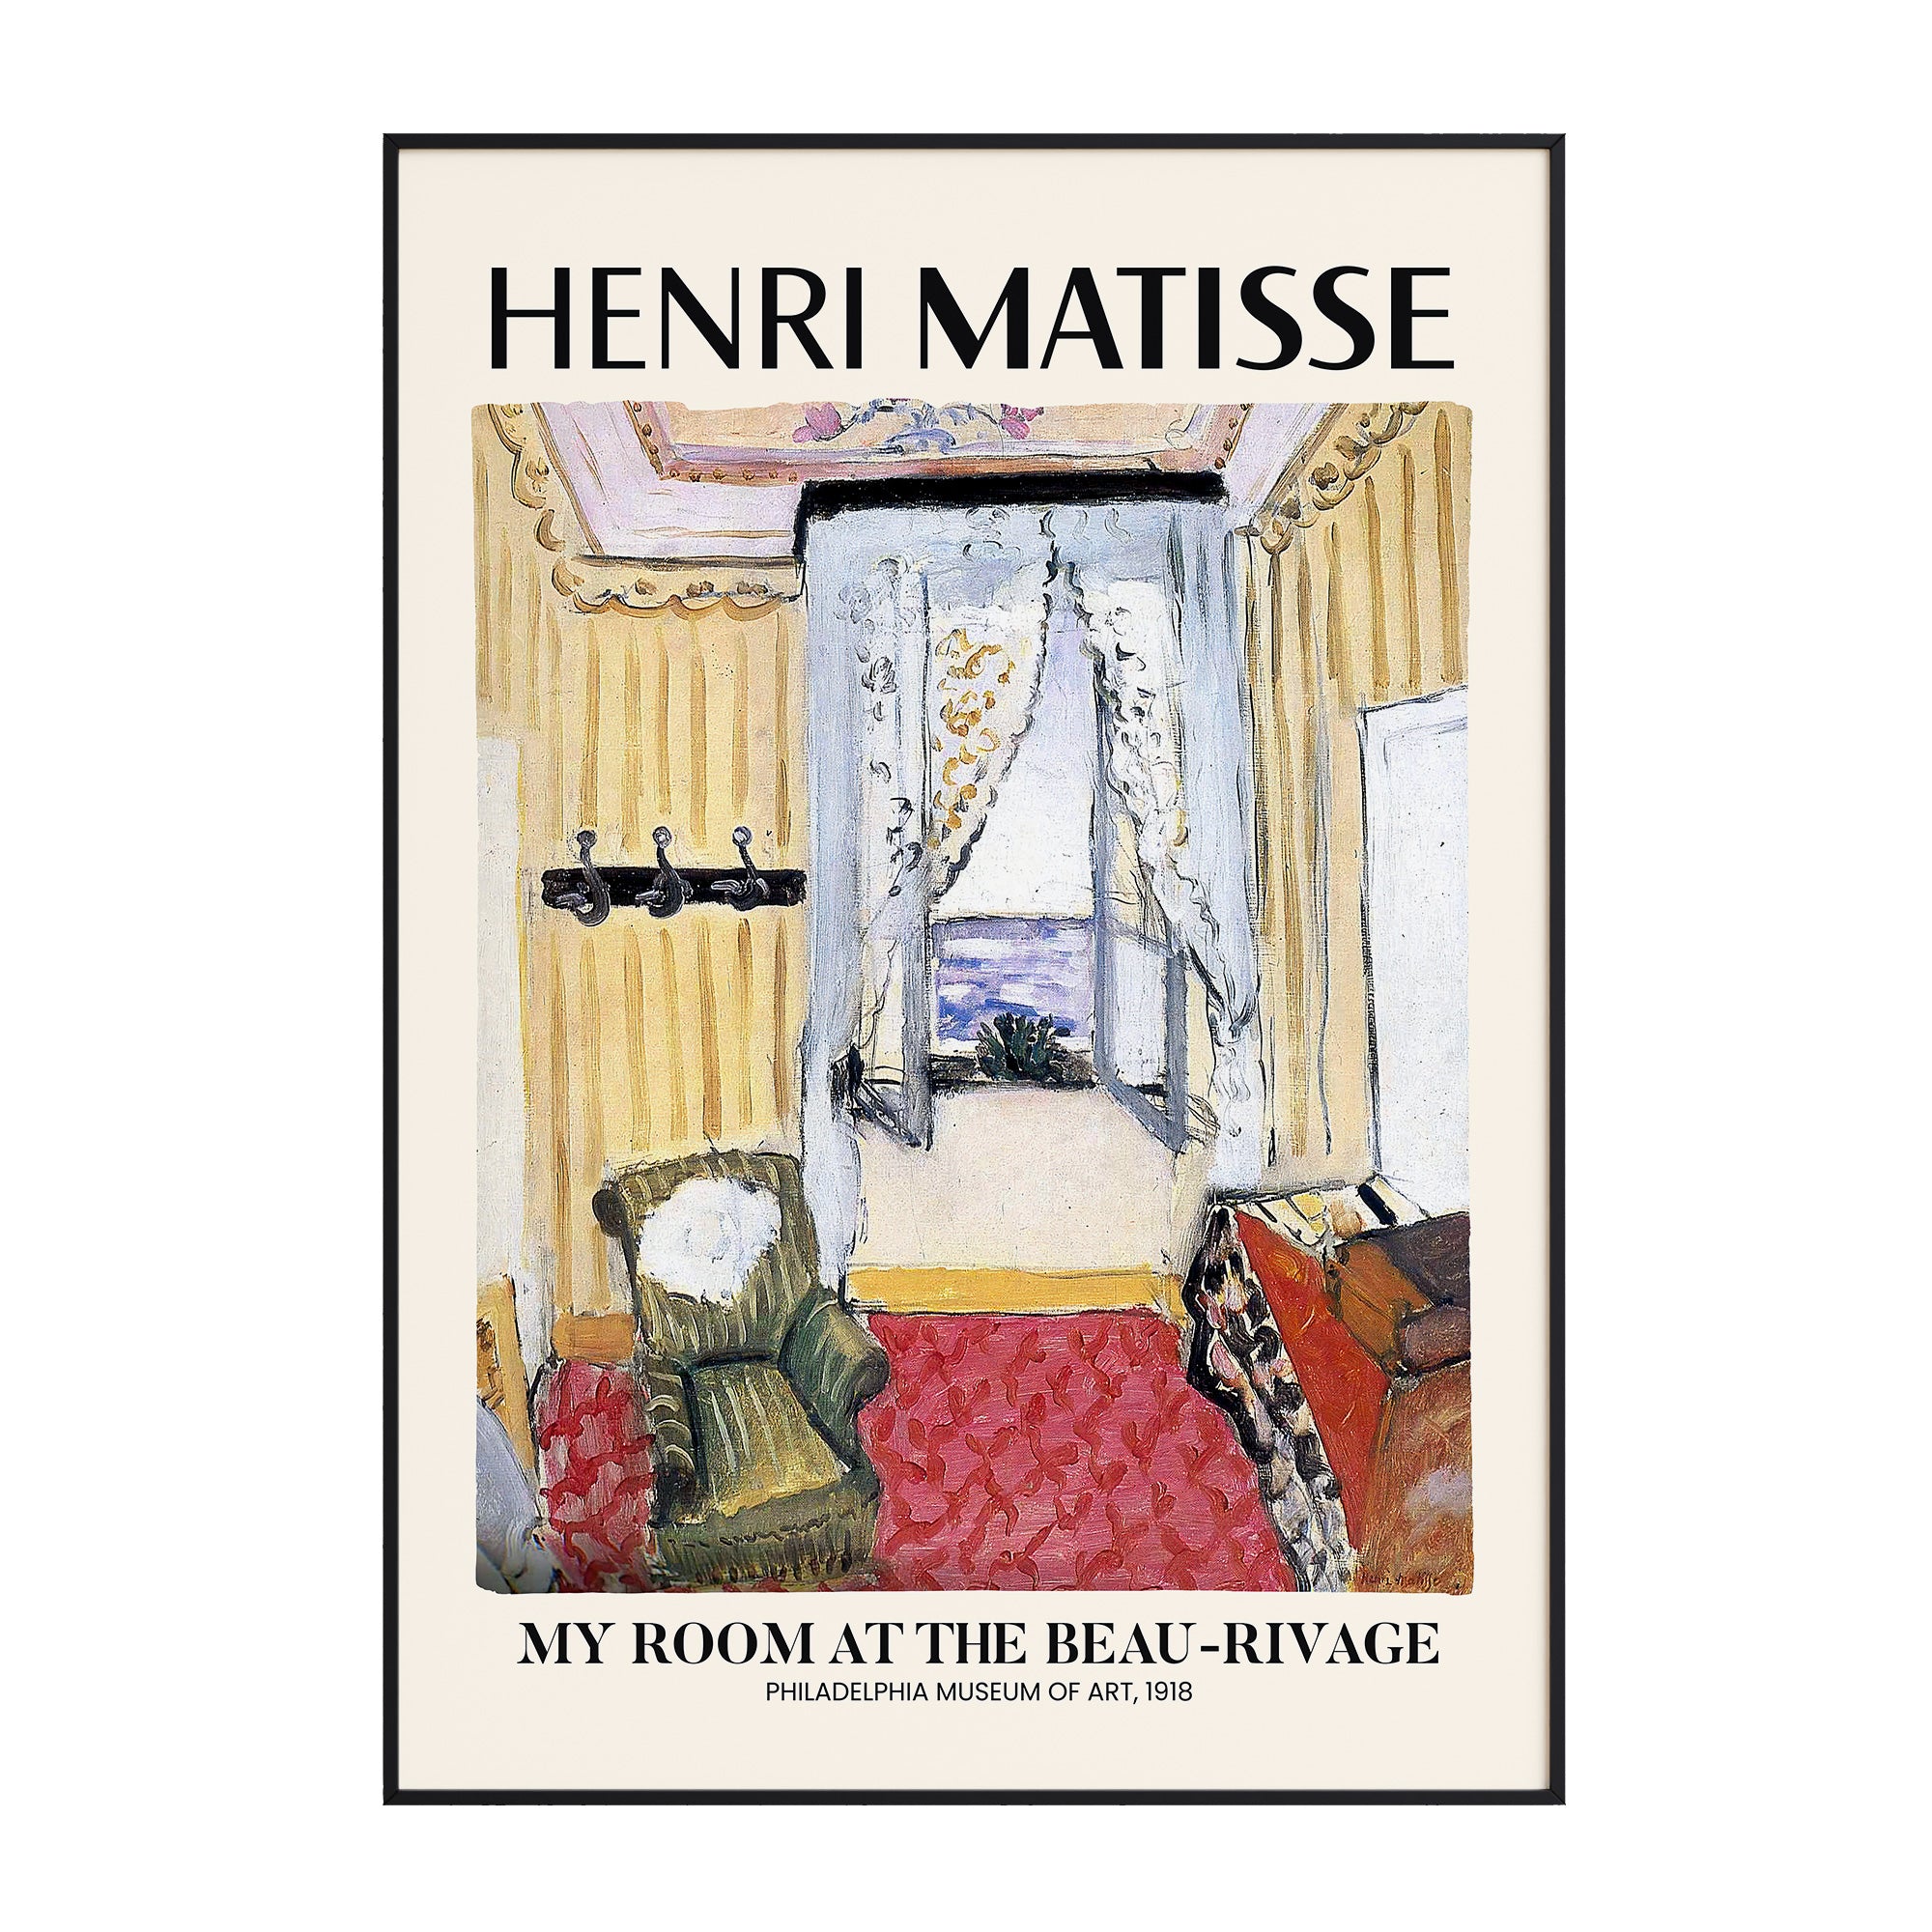 Henri Matisse - My Room at the Beau-Rivage 1918